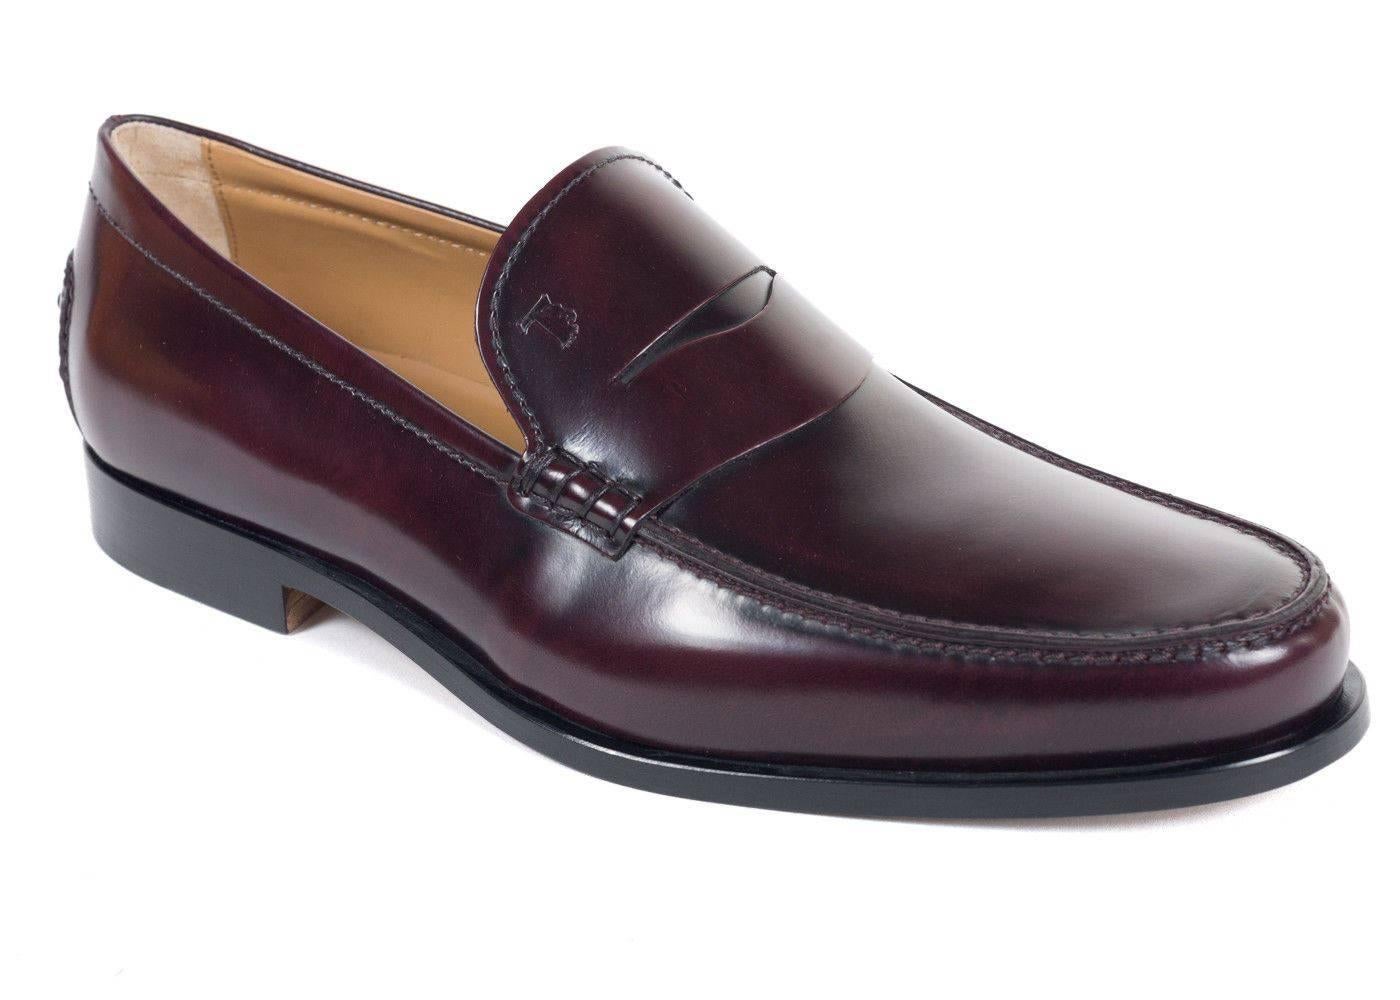 Brand New Tod's Men's Loafers
Original Box & Dust Bag Included
Retails in Stores & Online for $475
Size UK8 / US9
All Shoes are in UK Sizing


Tod's classic penny loafers crafted in burgundy calfskin leather for an ultra smooth look to these shoes.